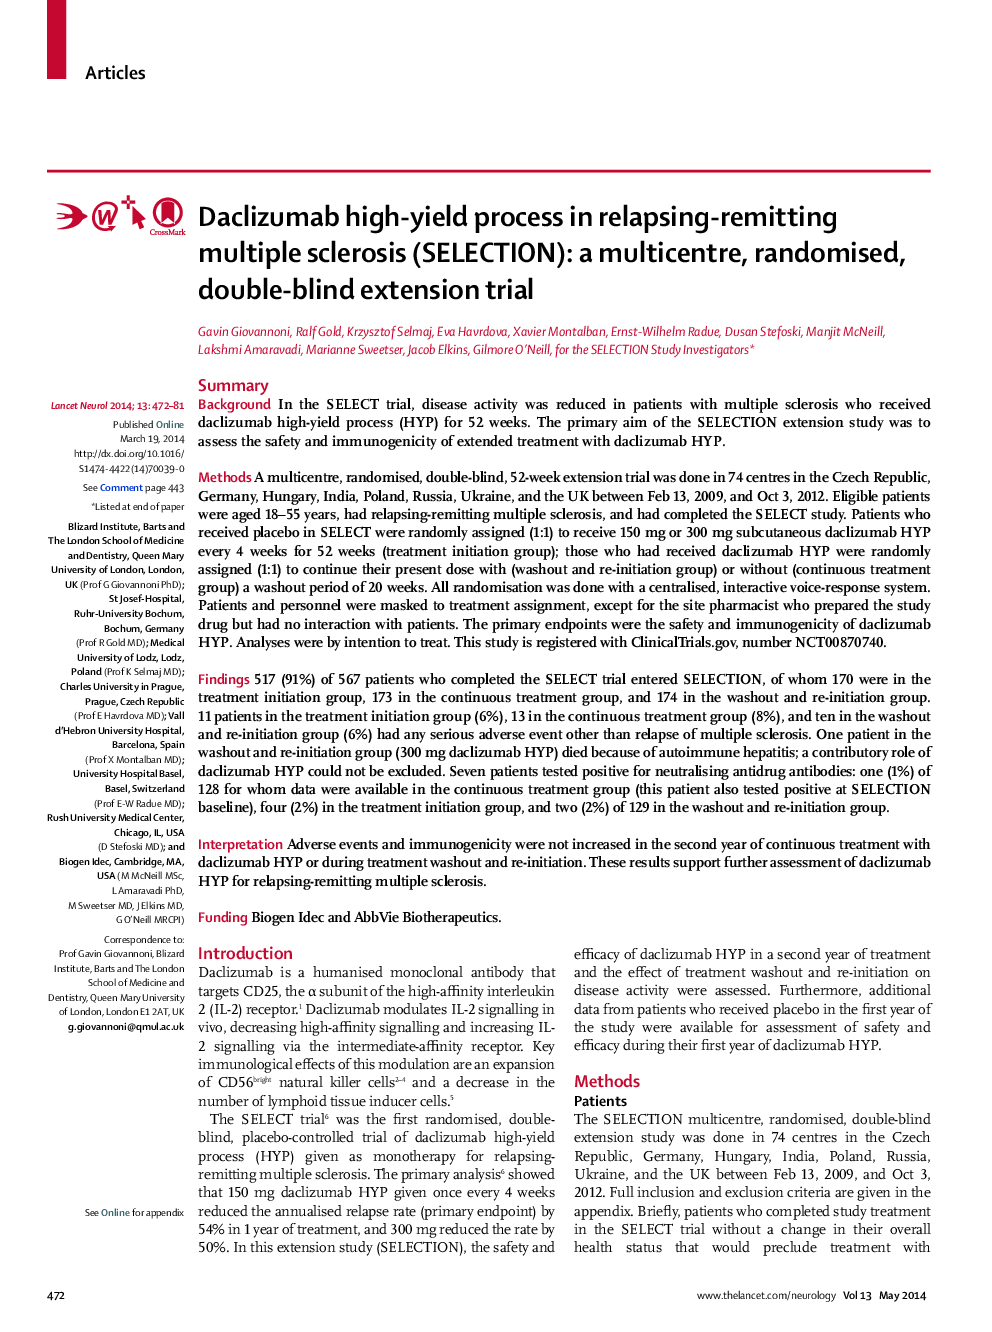 Daclizumab high-yield process in relapsing-remitting multiple sclerosis (SELECTION): a multicentre, randomised, double-blind extension trial